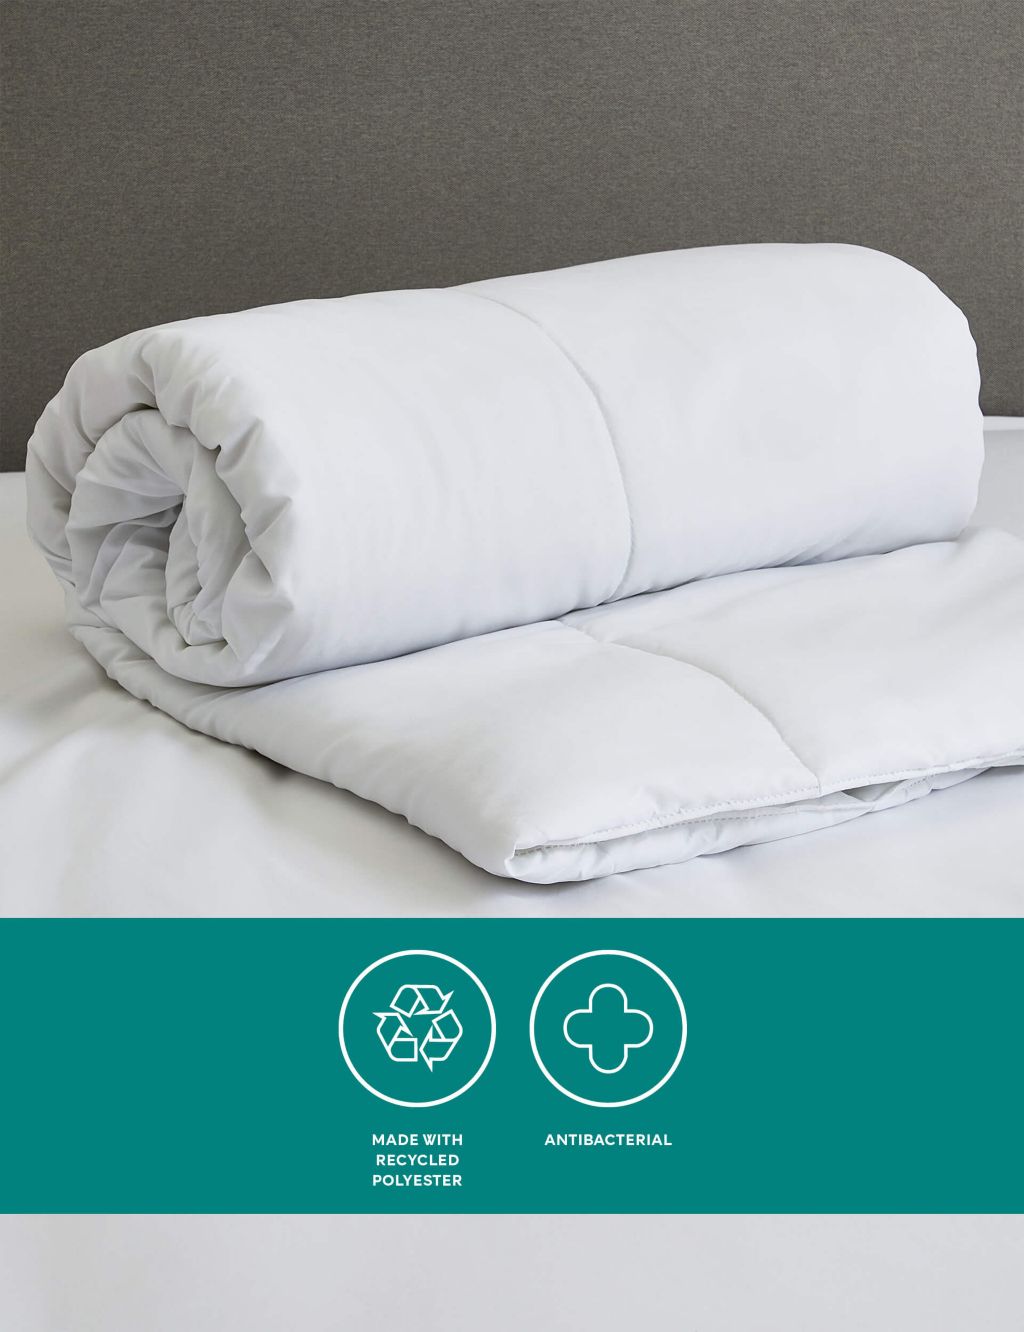 Simply Protect 4.5 Tog Duvet image 1